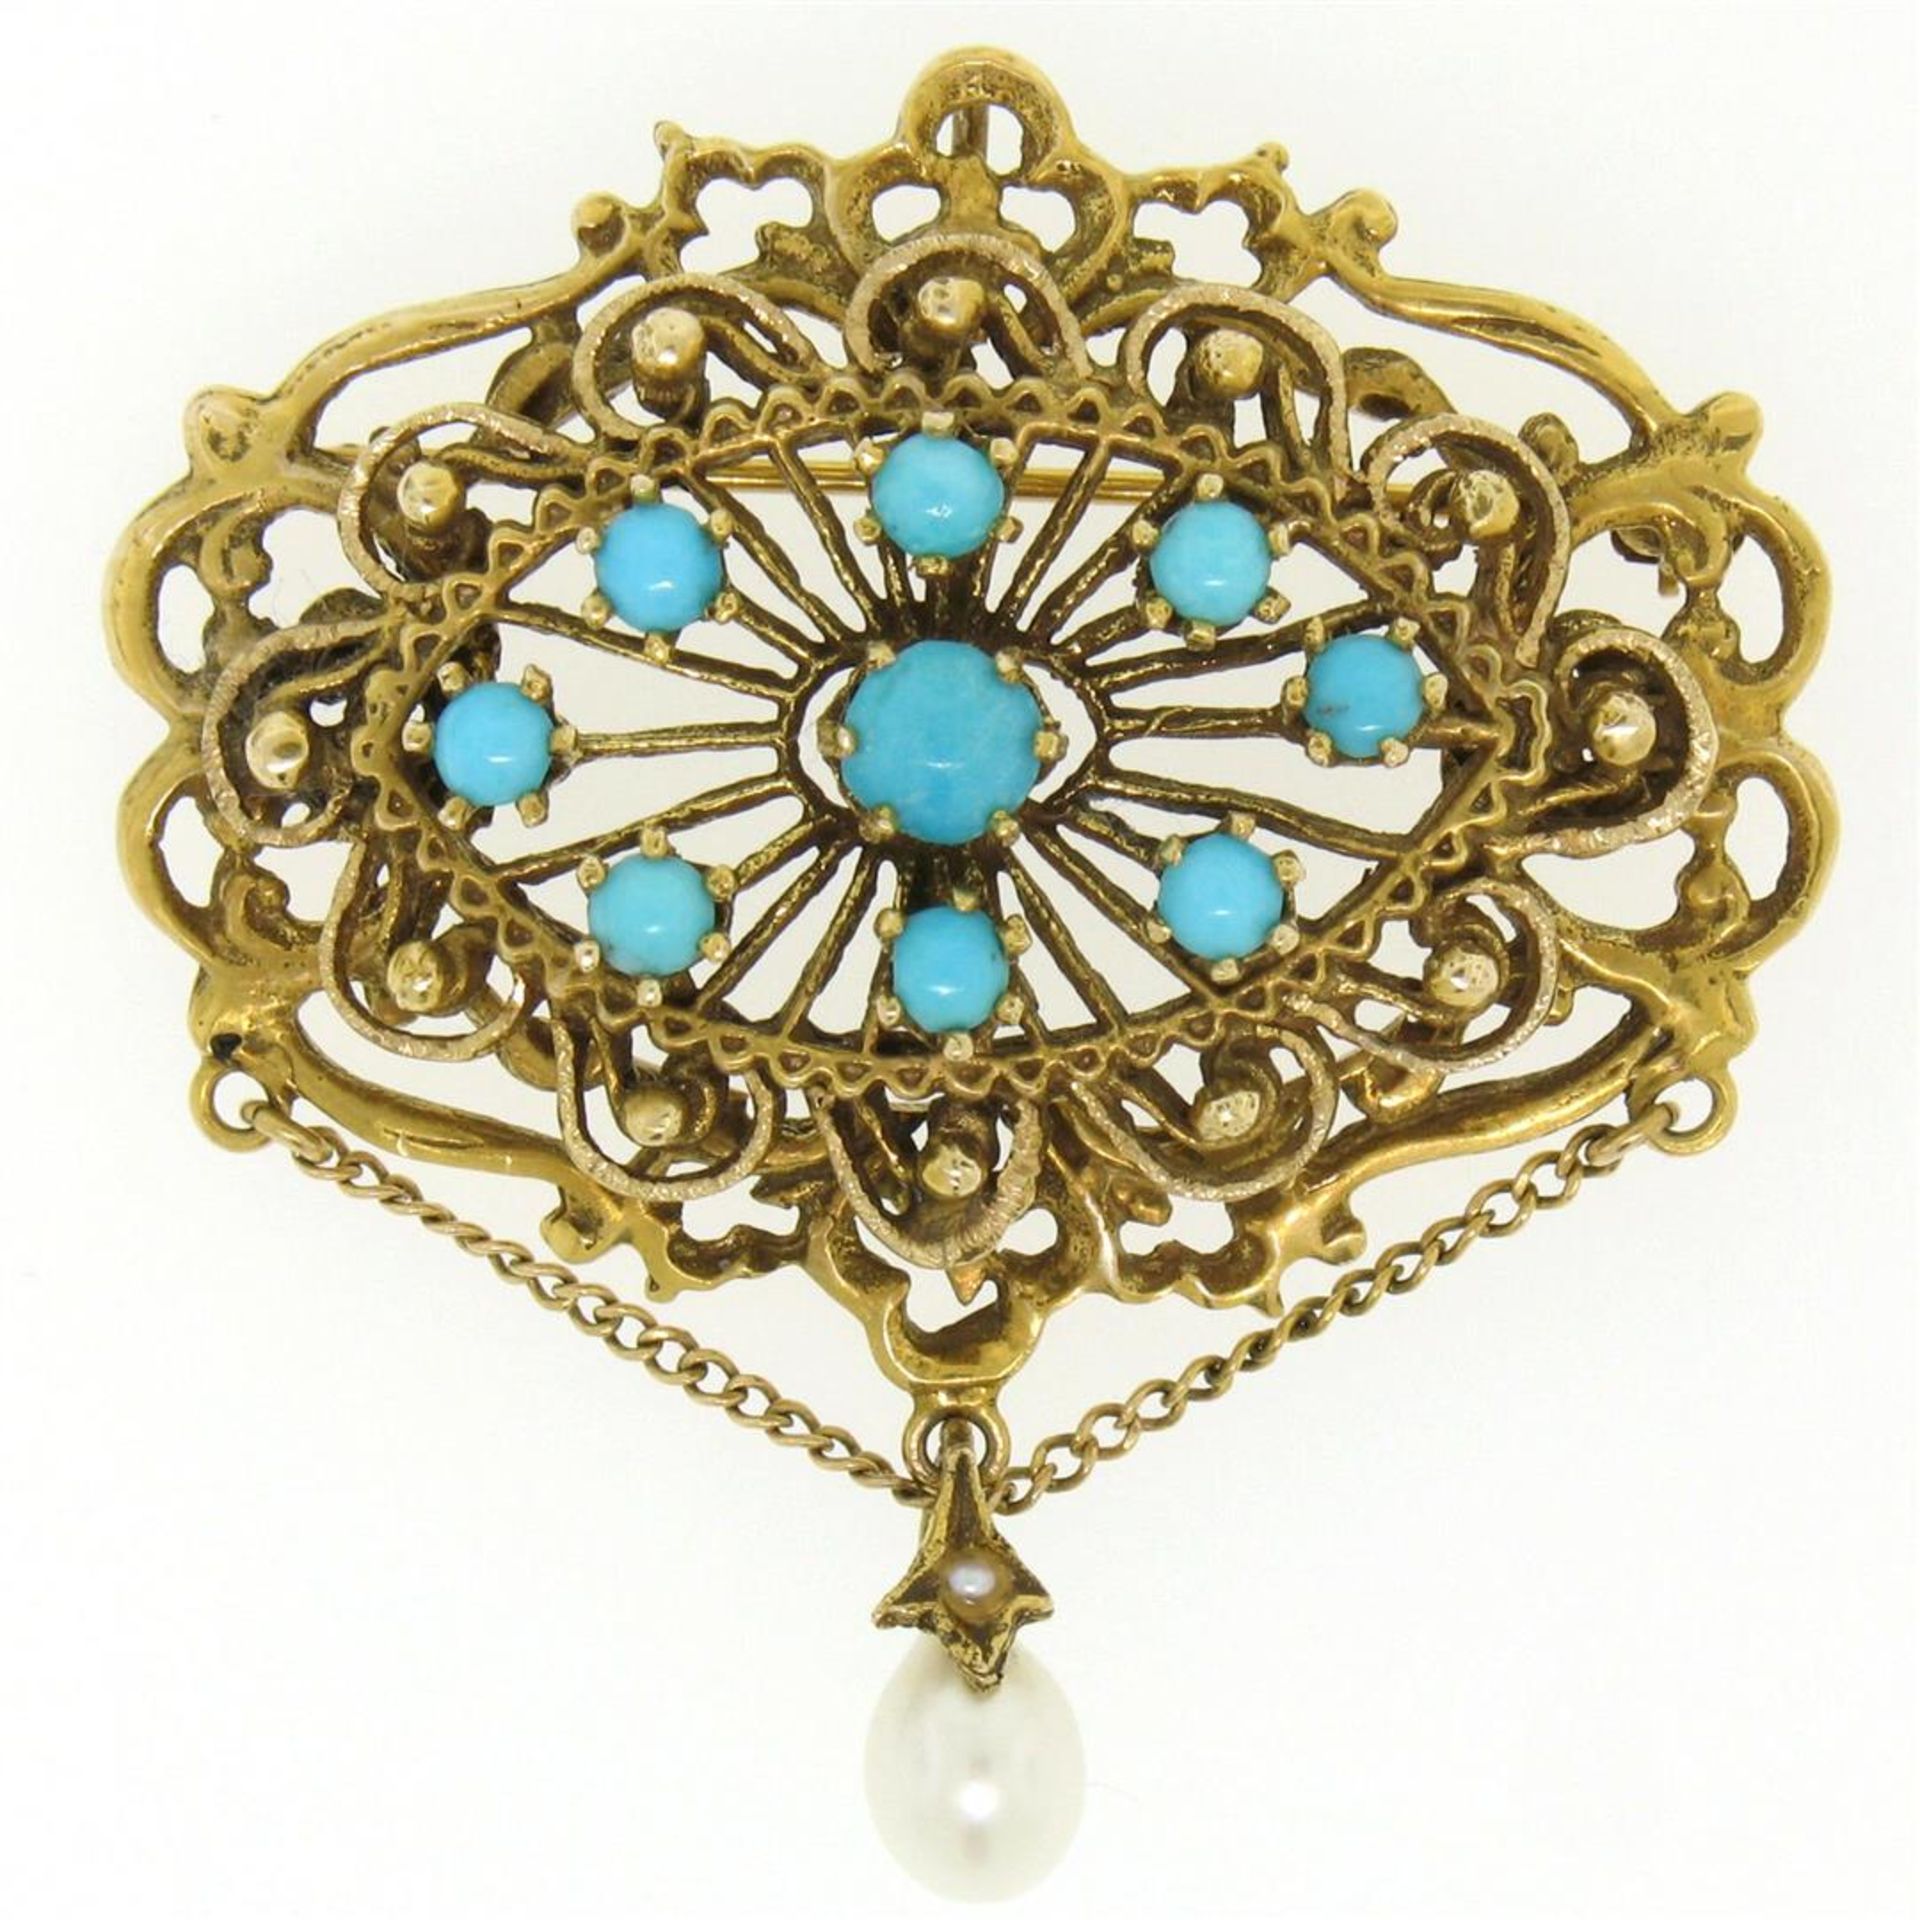 Vintage 14k Yellow Gold Round Turquoise & Pearl Open Work Brooch Pin Pendant - Image 2 of 6